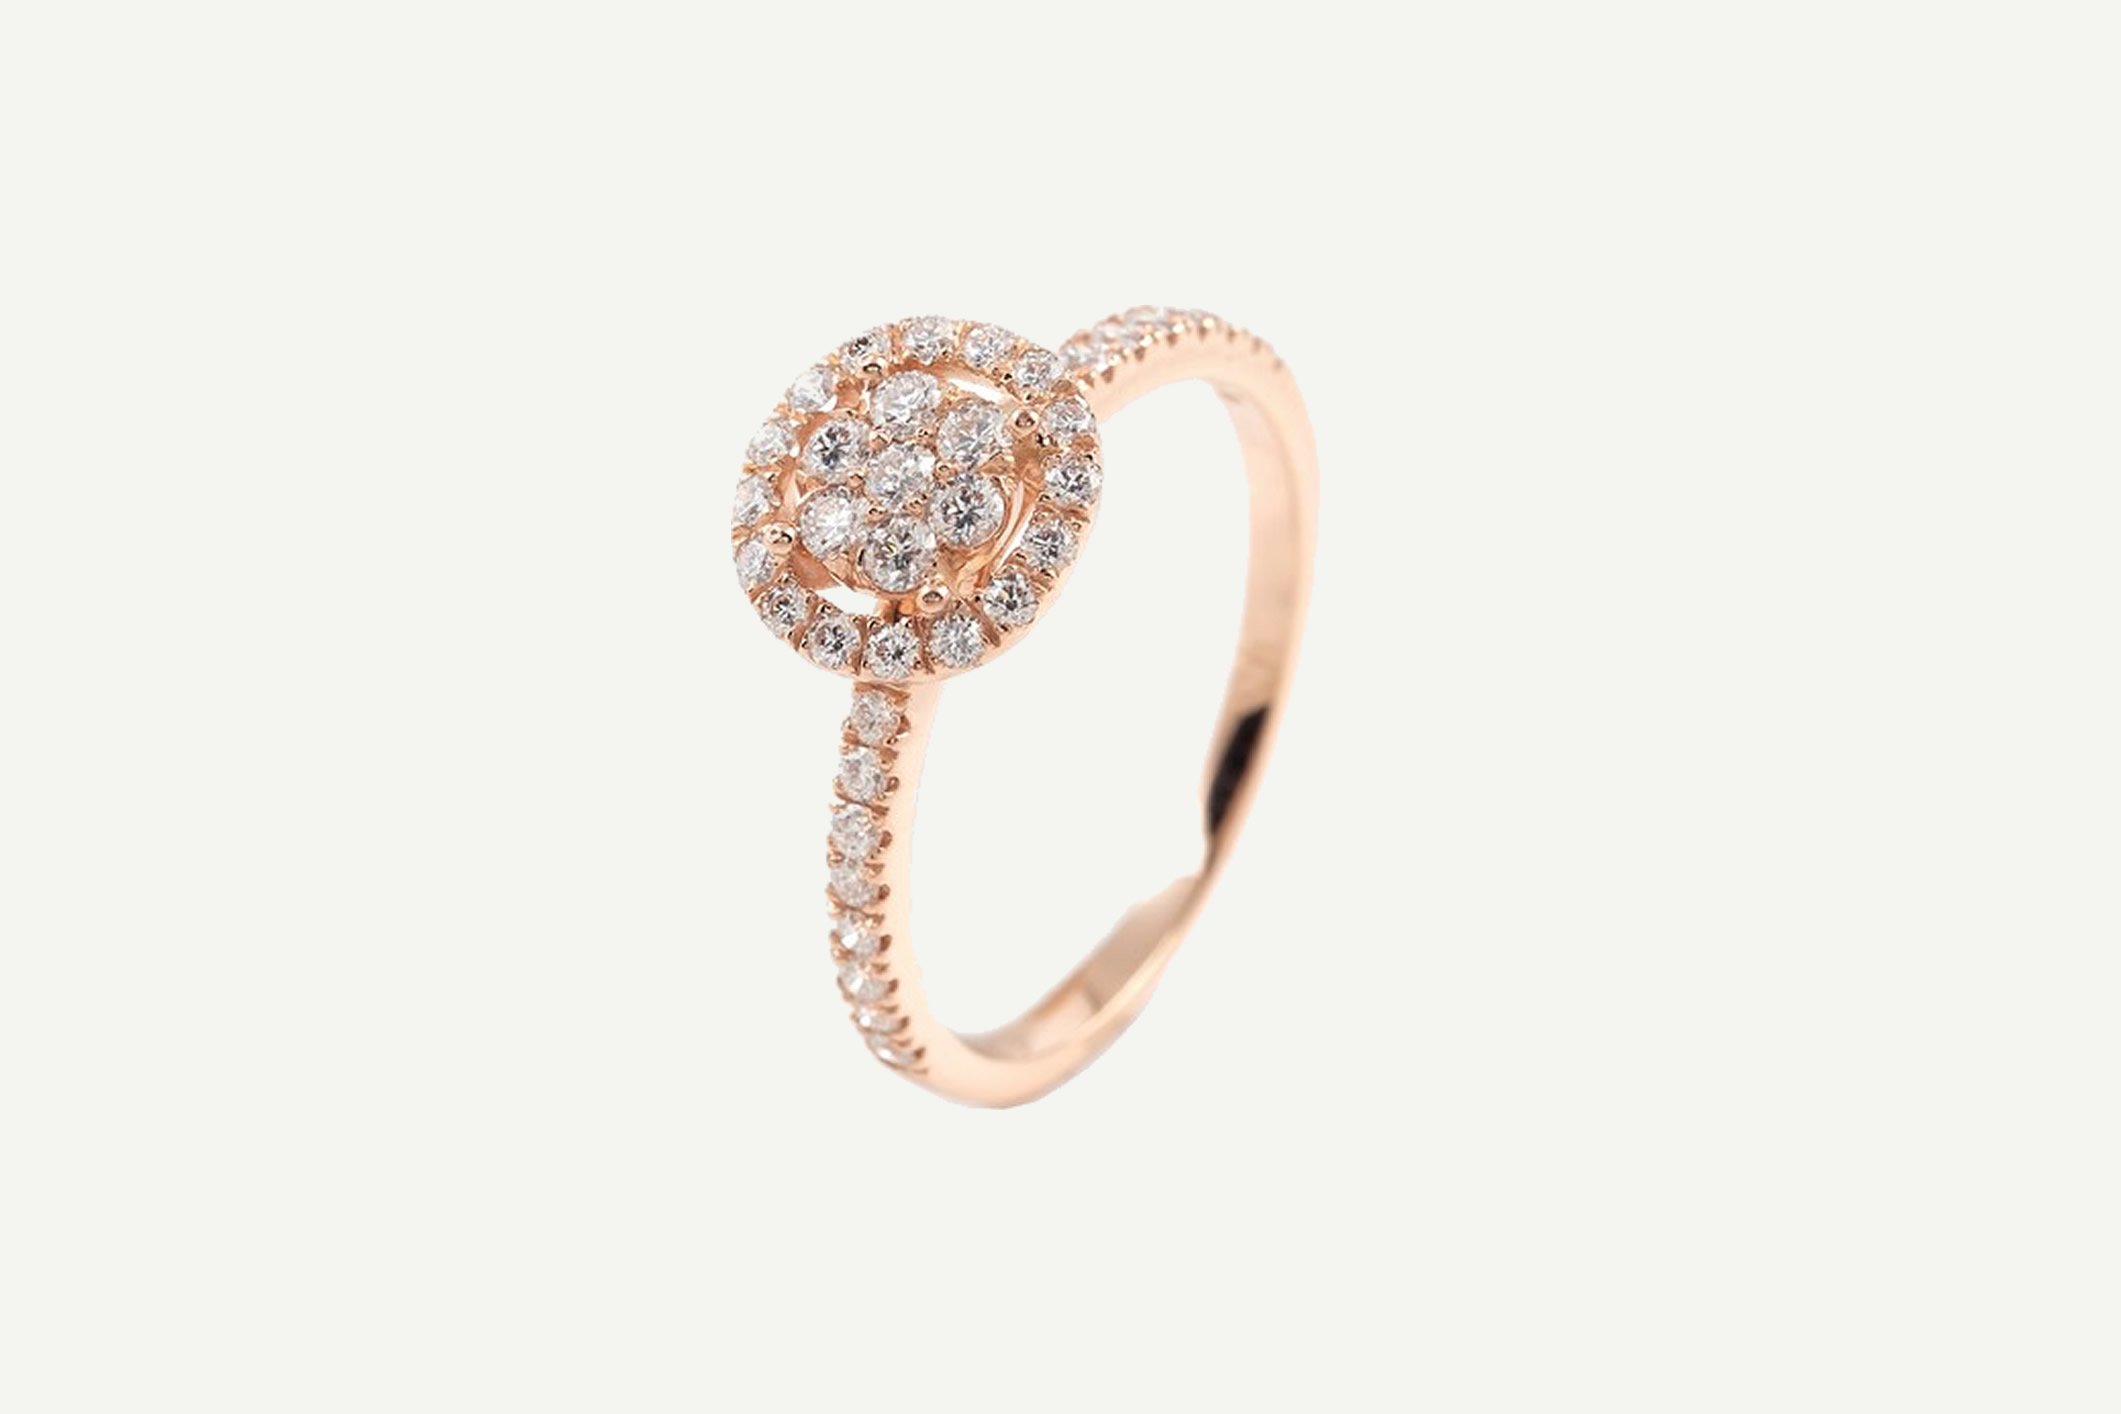 Rose gold ring with diamonds from the Setenta y Nueve collection